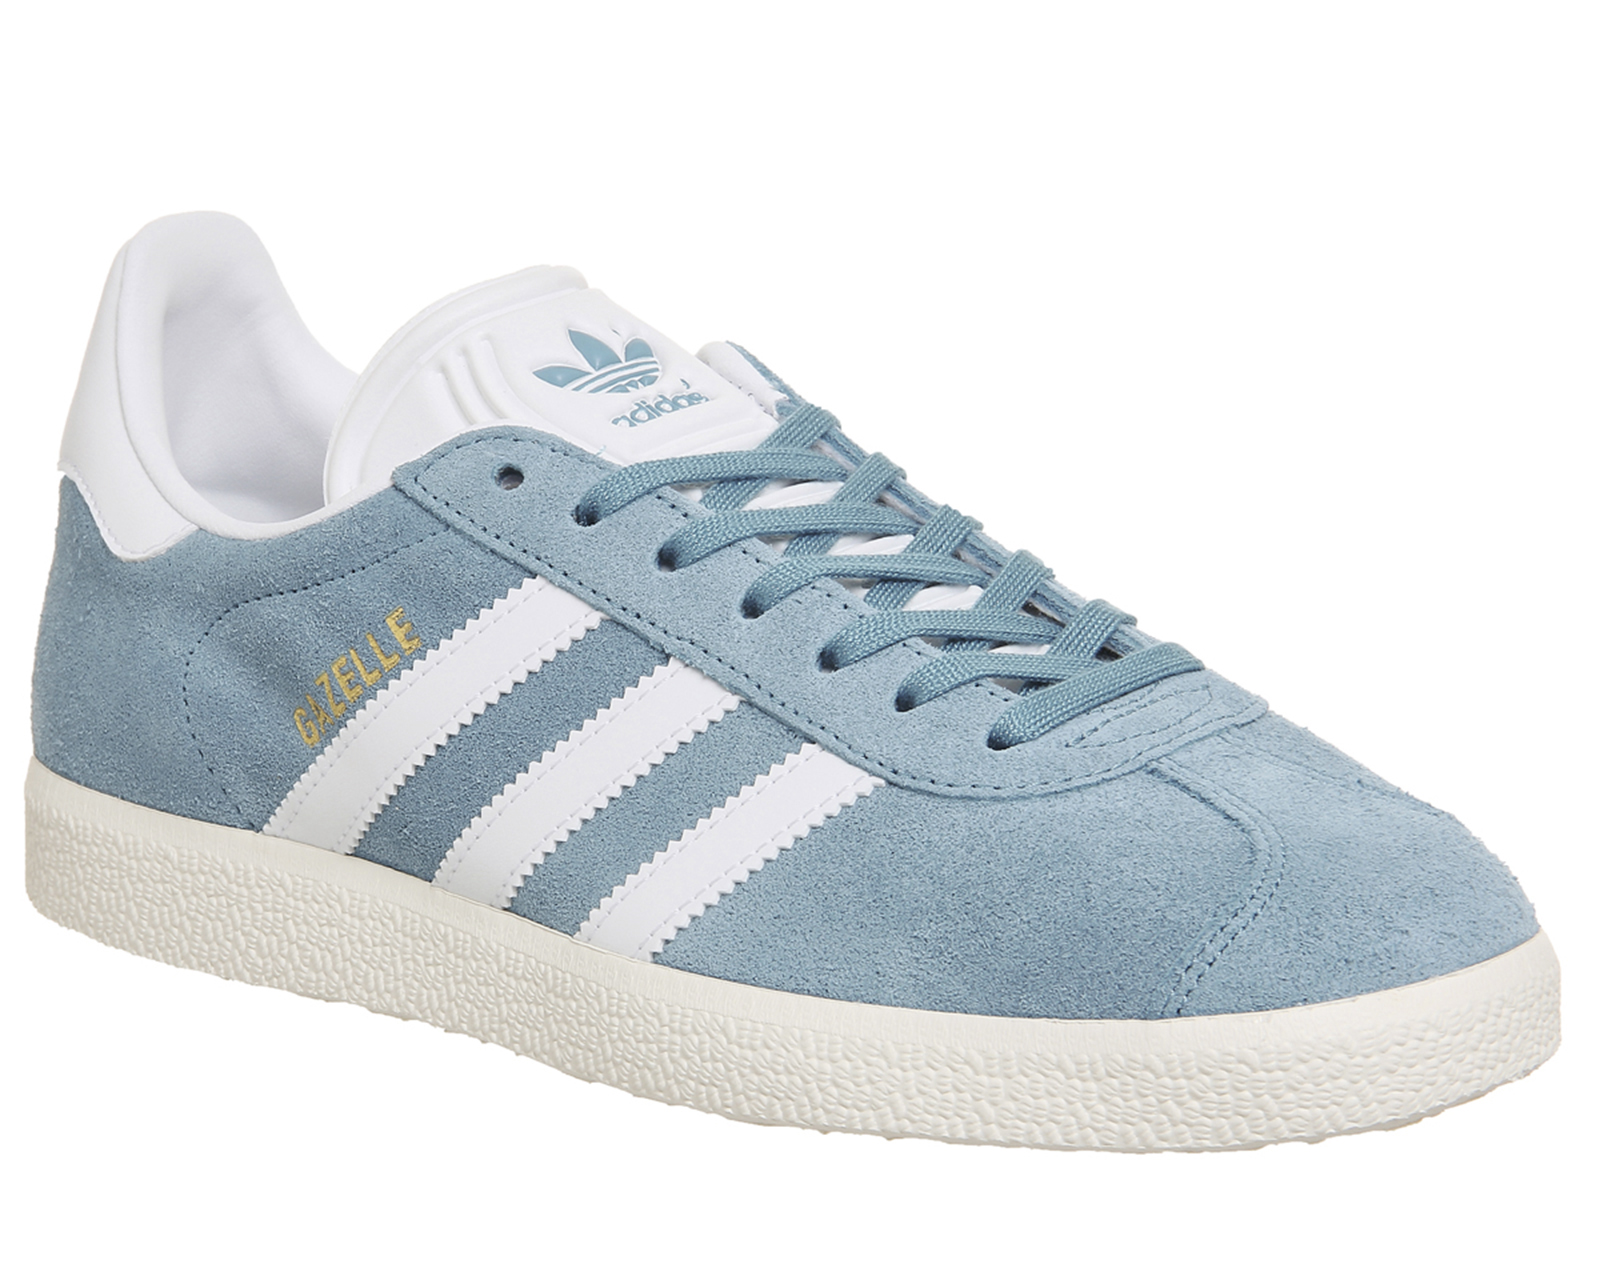 adidas Gazelle Trainers Tactile Steel White Gold - Women's Trainers